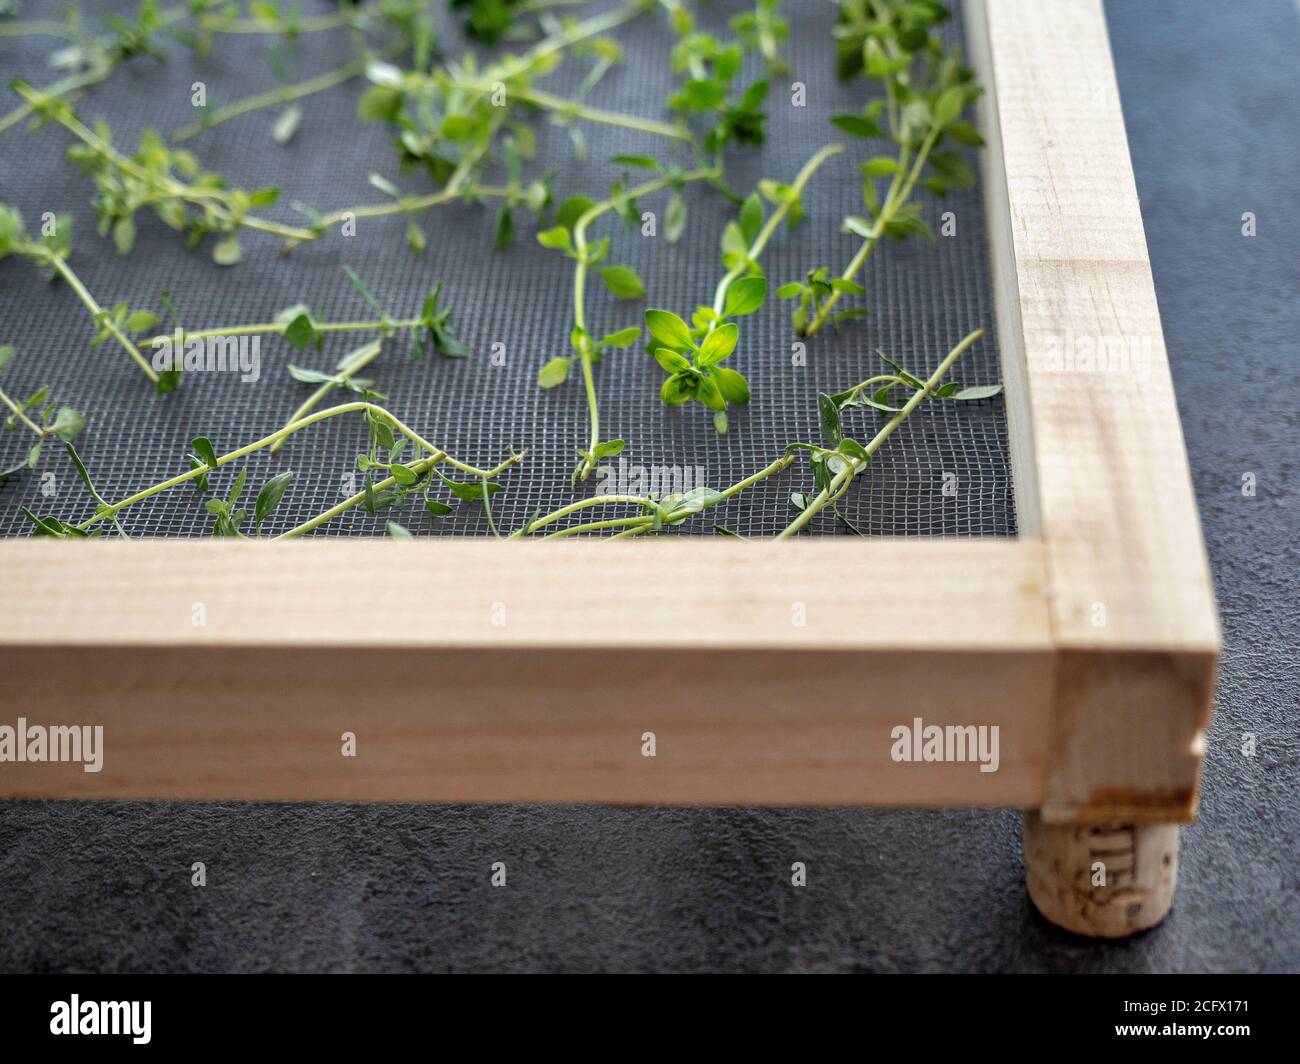 Fresh thyme (thymus vulgaris) on sieve ready for drying. Overhead view. Stock Photo